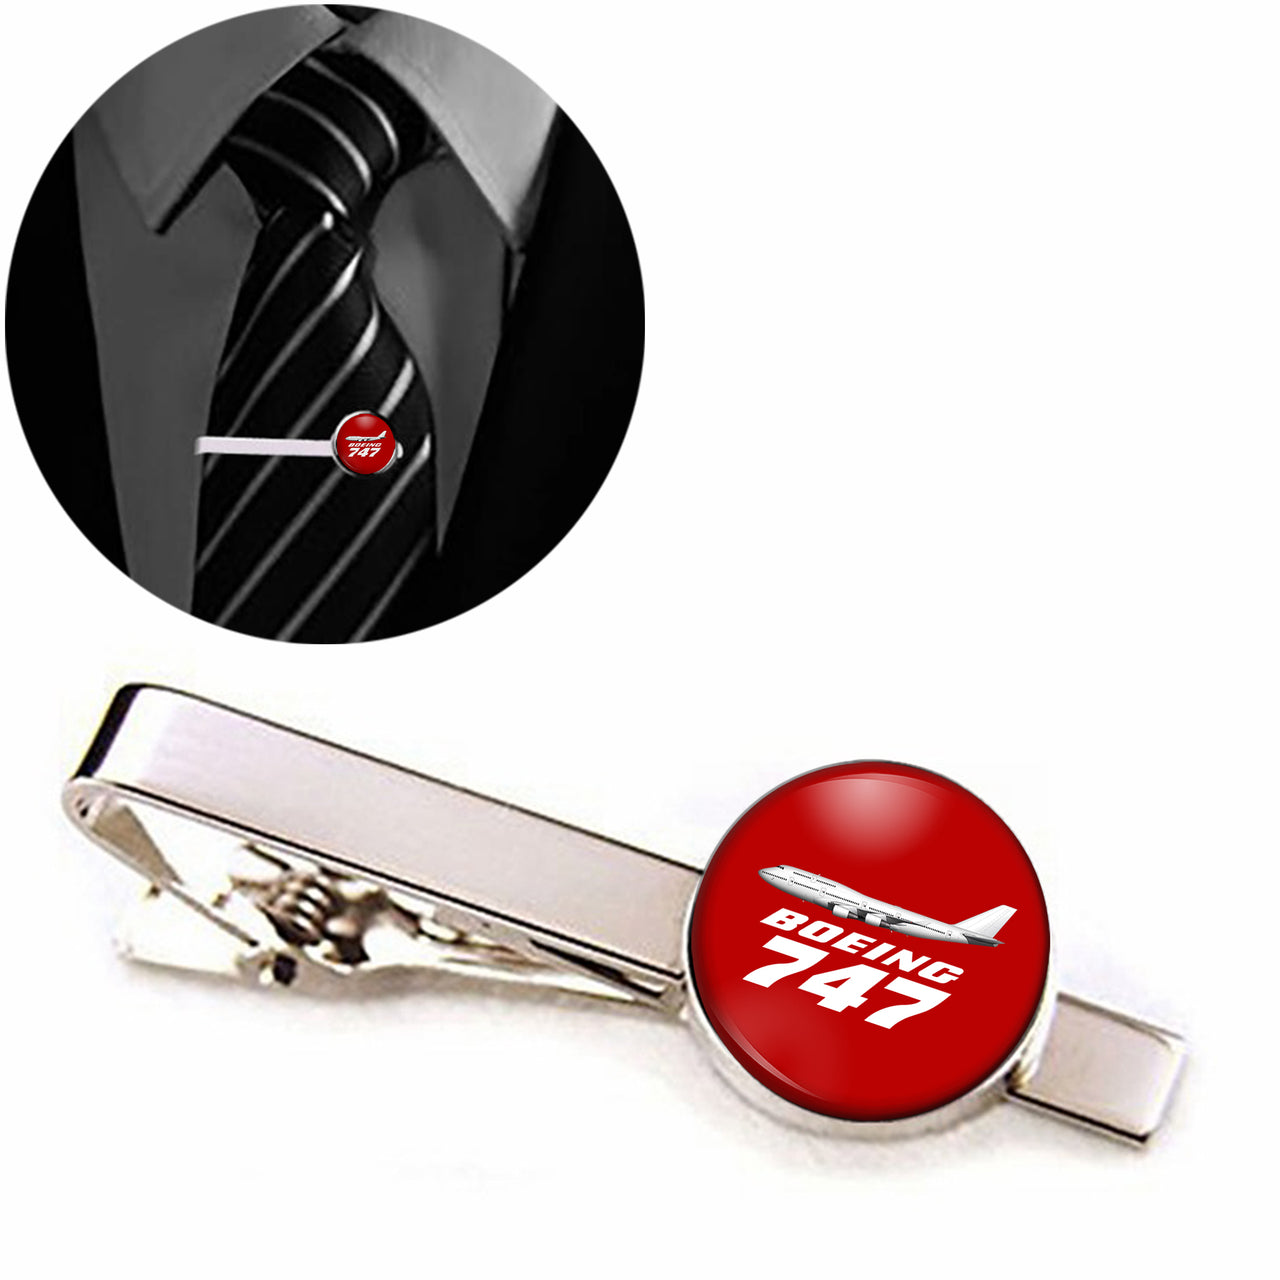 The Boeing 747 Designed Tie Clips